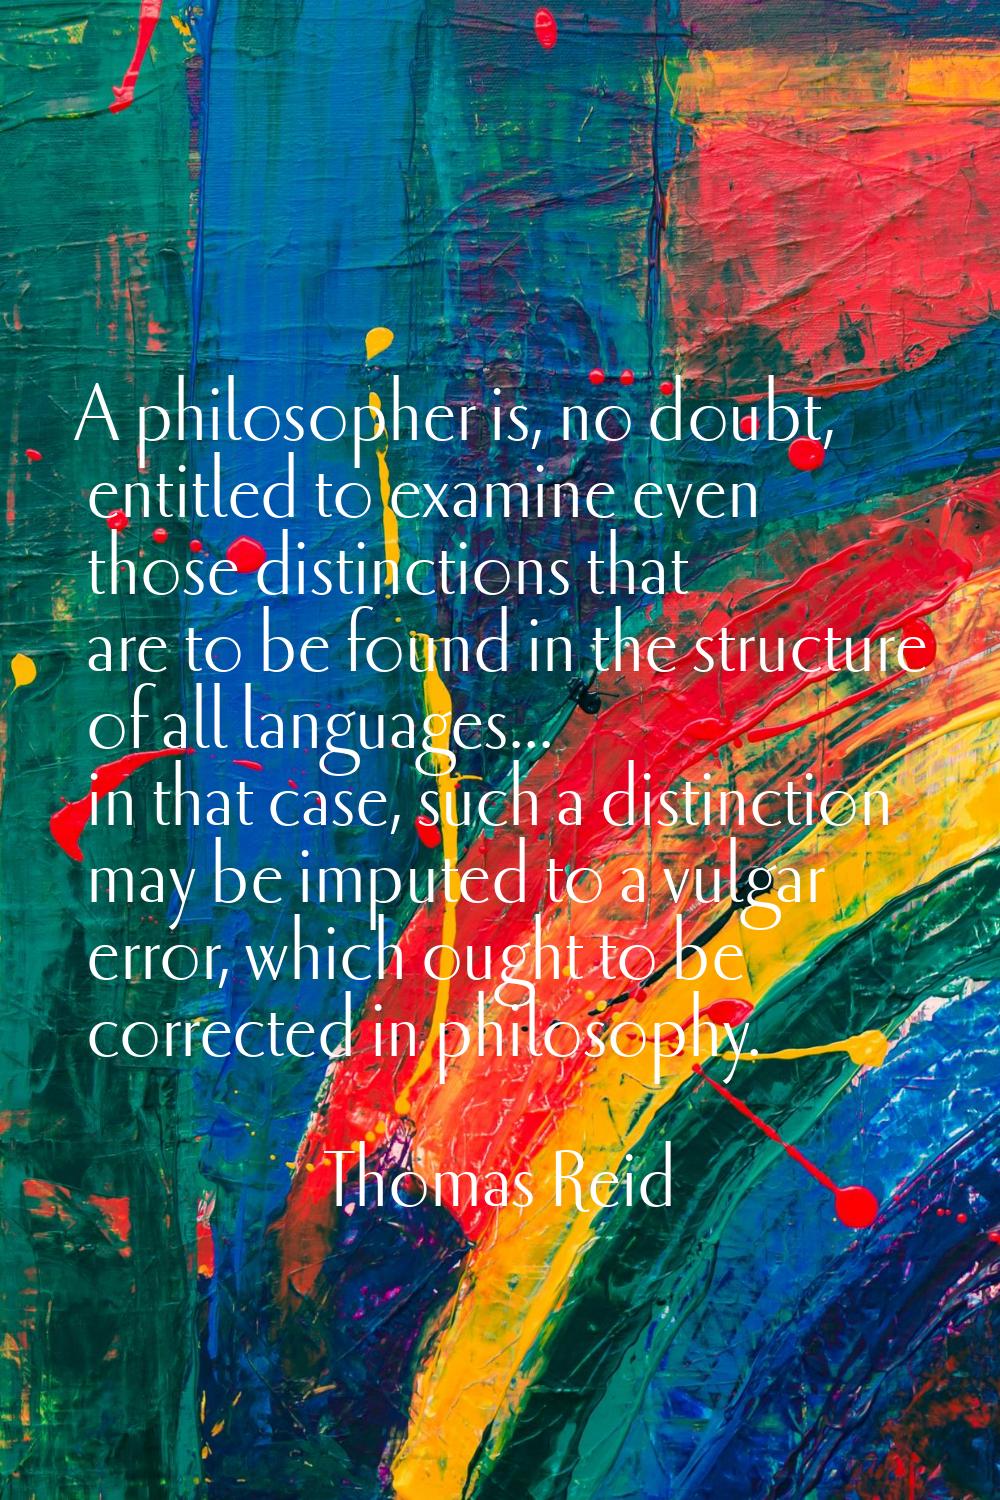 A philosopher is, no doubt, entitled to examine even those distinctions that are to be found in the